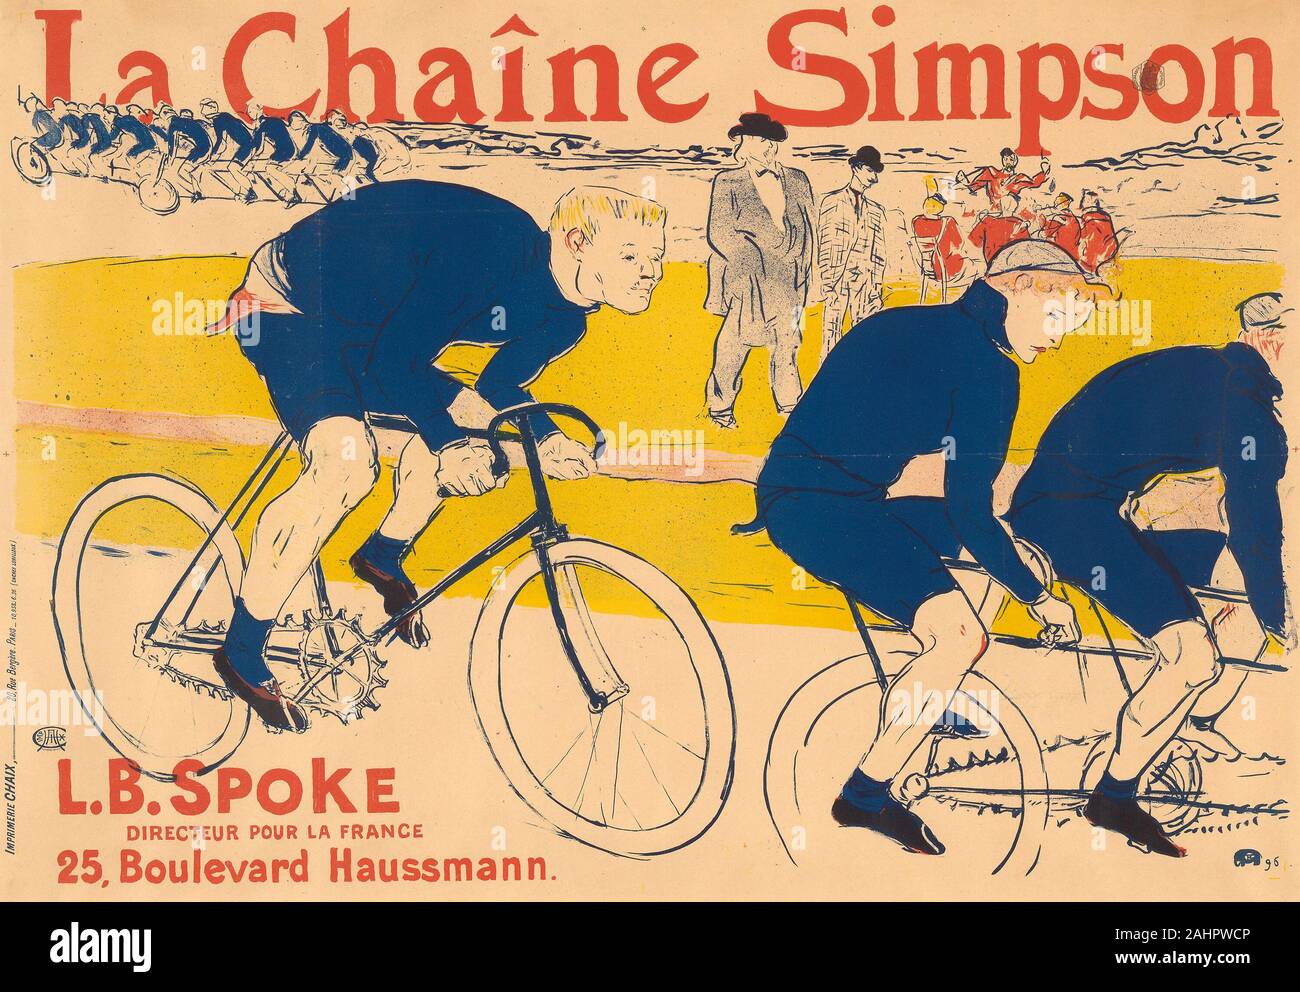 Henri de Toulouse-Lautrec. The Simpson Chain. 1896. France. Color brush and spatter lithograph (poster) on tan wove paper with lettering by another hand This poster represents Lautrec’s final design for an advertisement for a bicycle lever chain recently invented by the London manufacturer W. S. Simpson. Competitive cyclist Constant Huret rides a bicycle equipped with the device, speeding on to victory with its help. This poster sports a much more dynamic composition than the artist’s previous attempt, as well as a more realistic depiction of bicycles, despite the four- and five-seaters in the Stock Photo